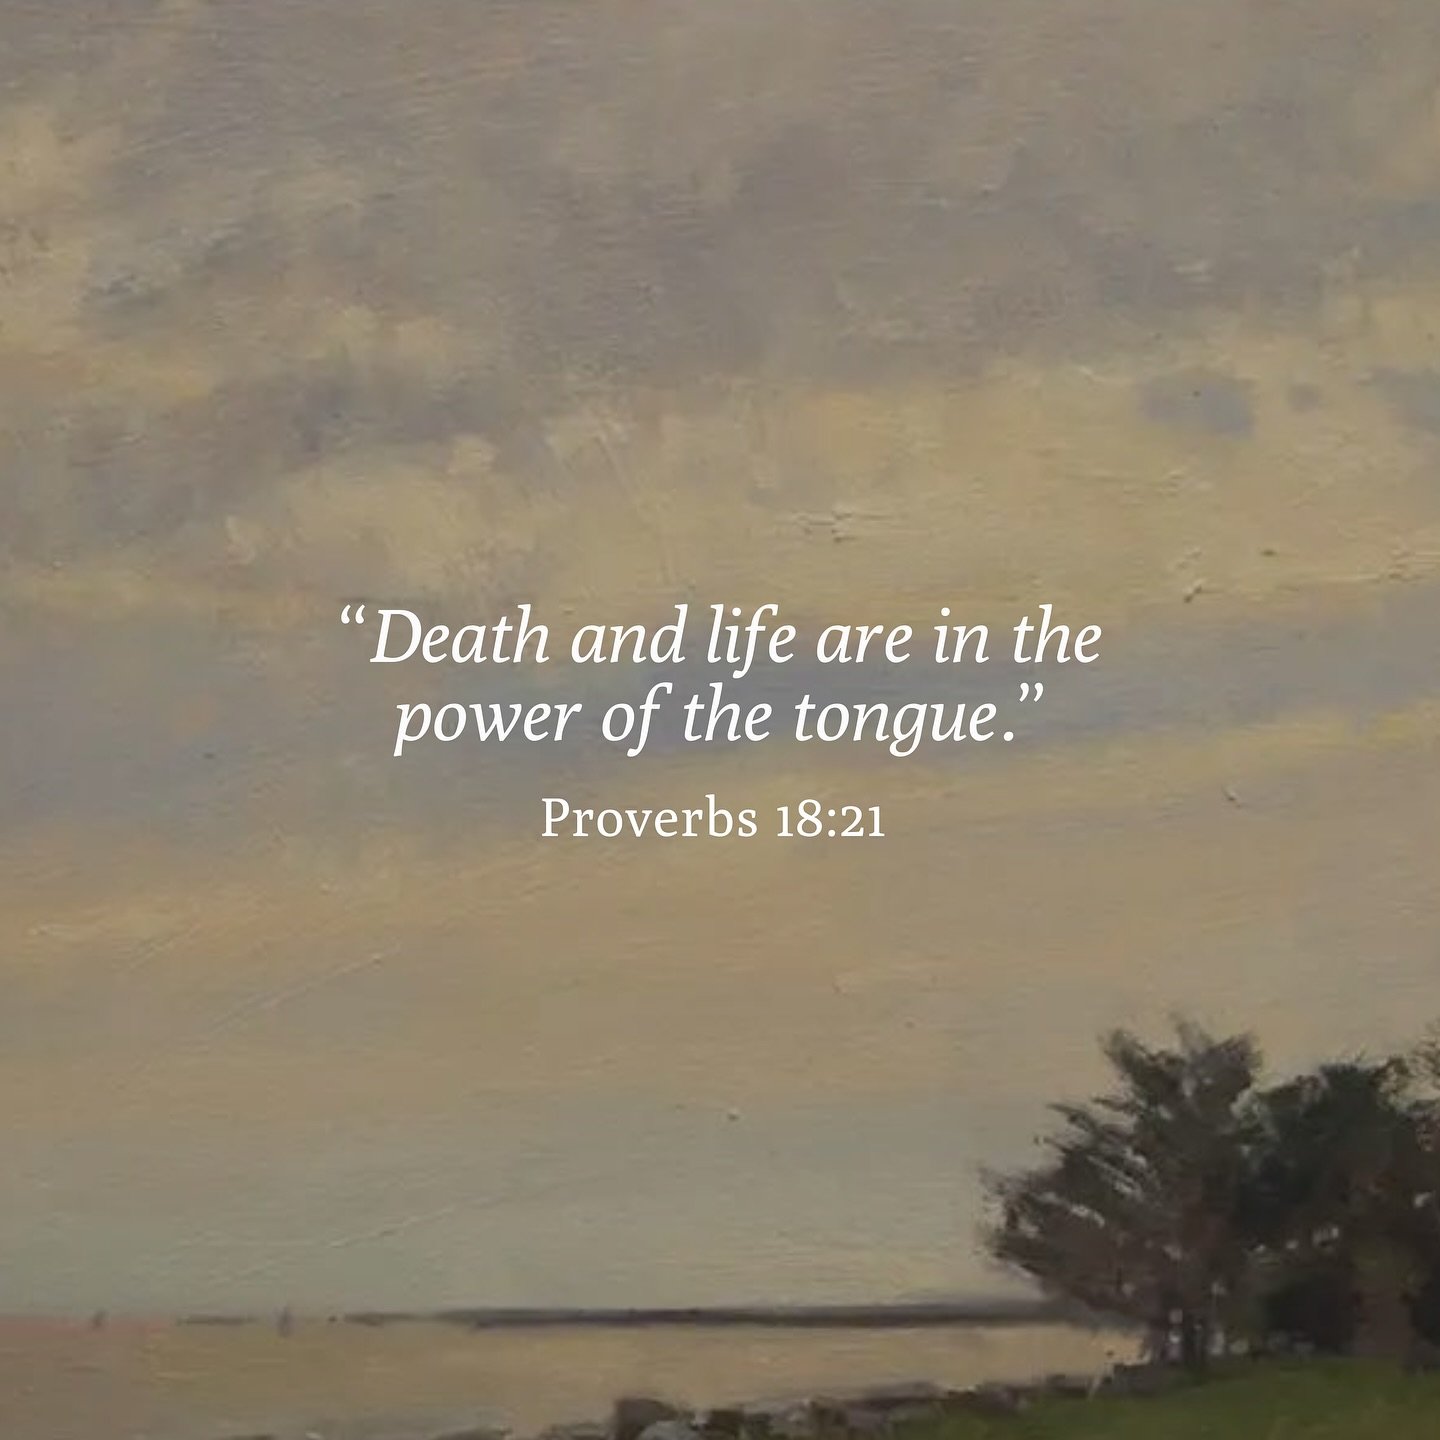 &ldquo;Death and life are in the power of the tongue.&rdquo; Proverbs 18:21